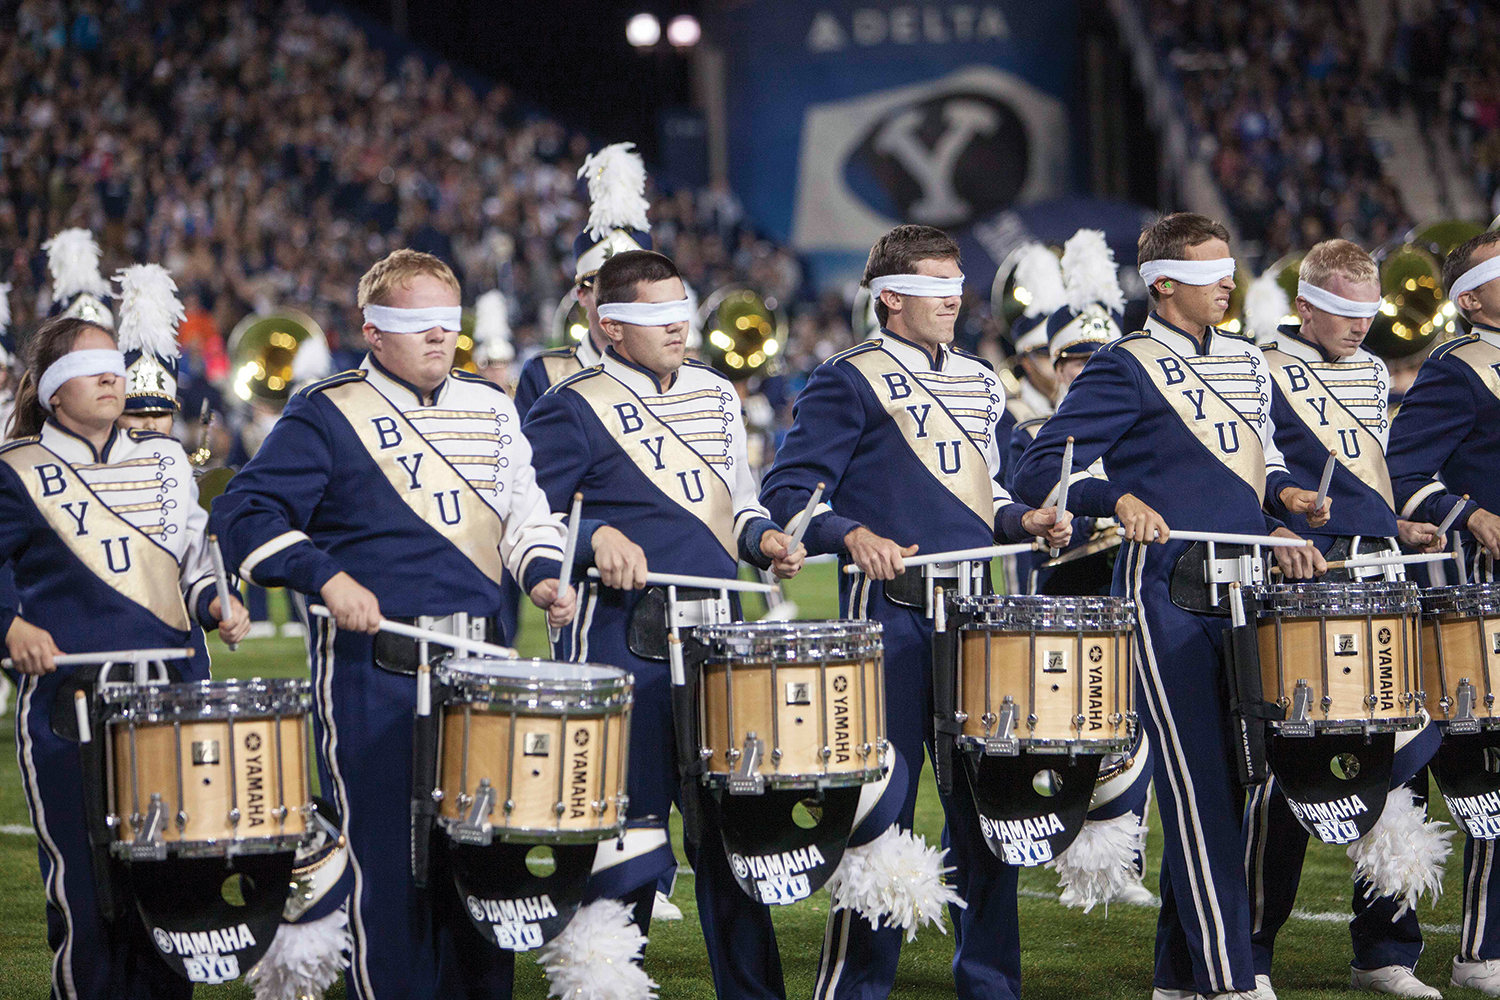 The drum line of the BYU Marching Band performs a tough sequence blindfolded.